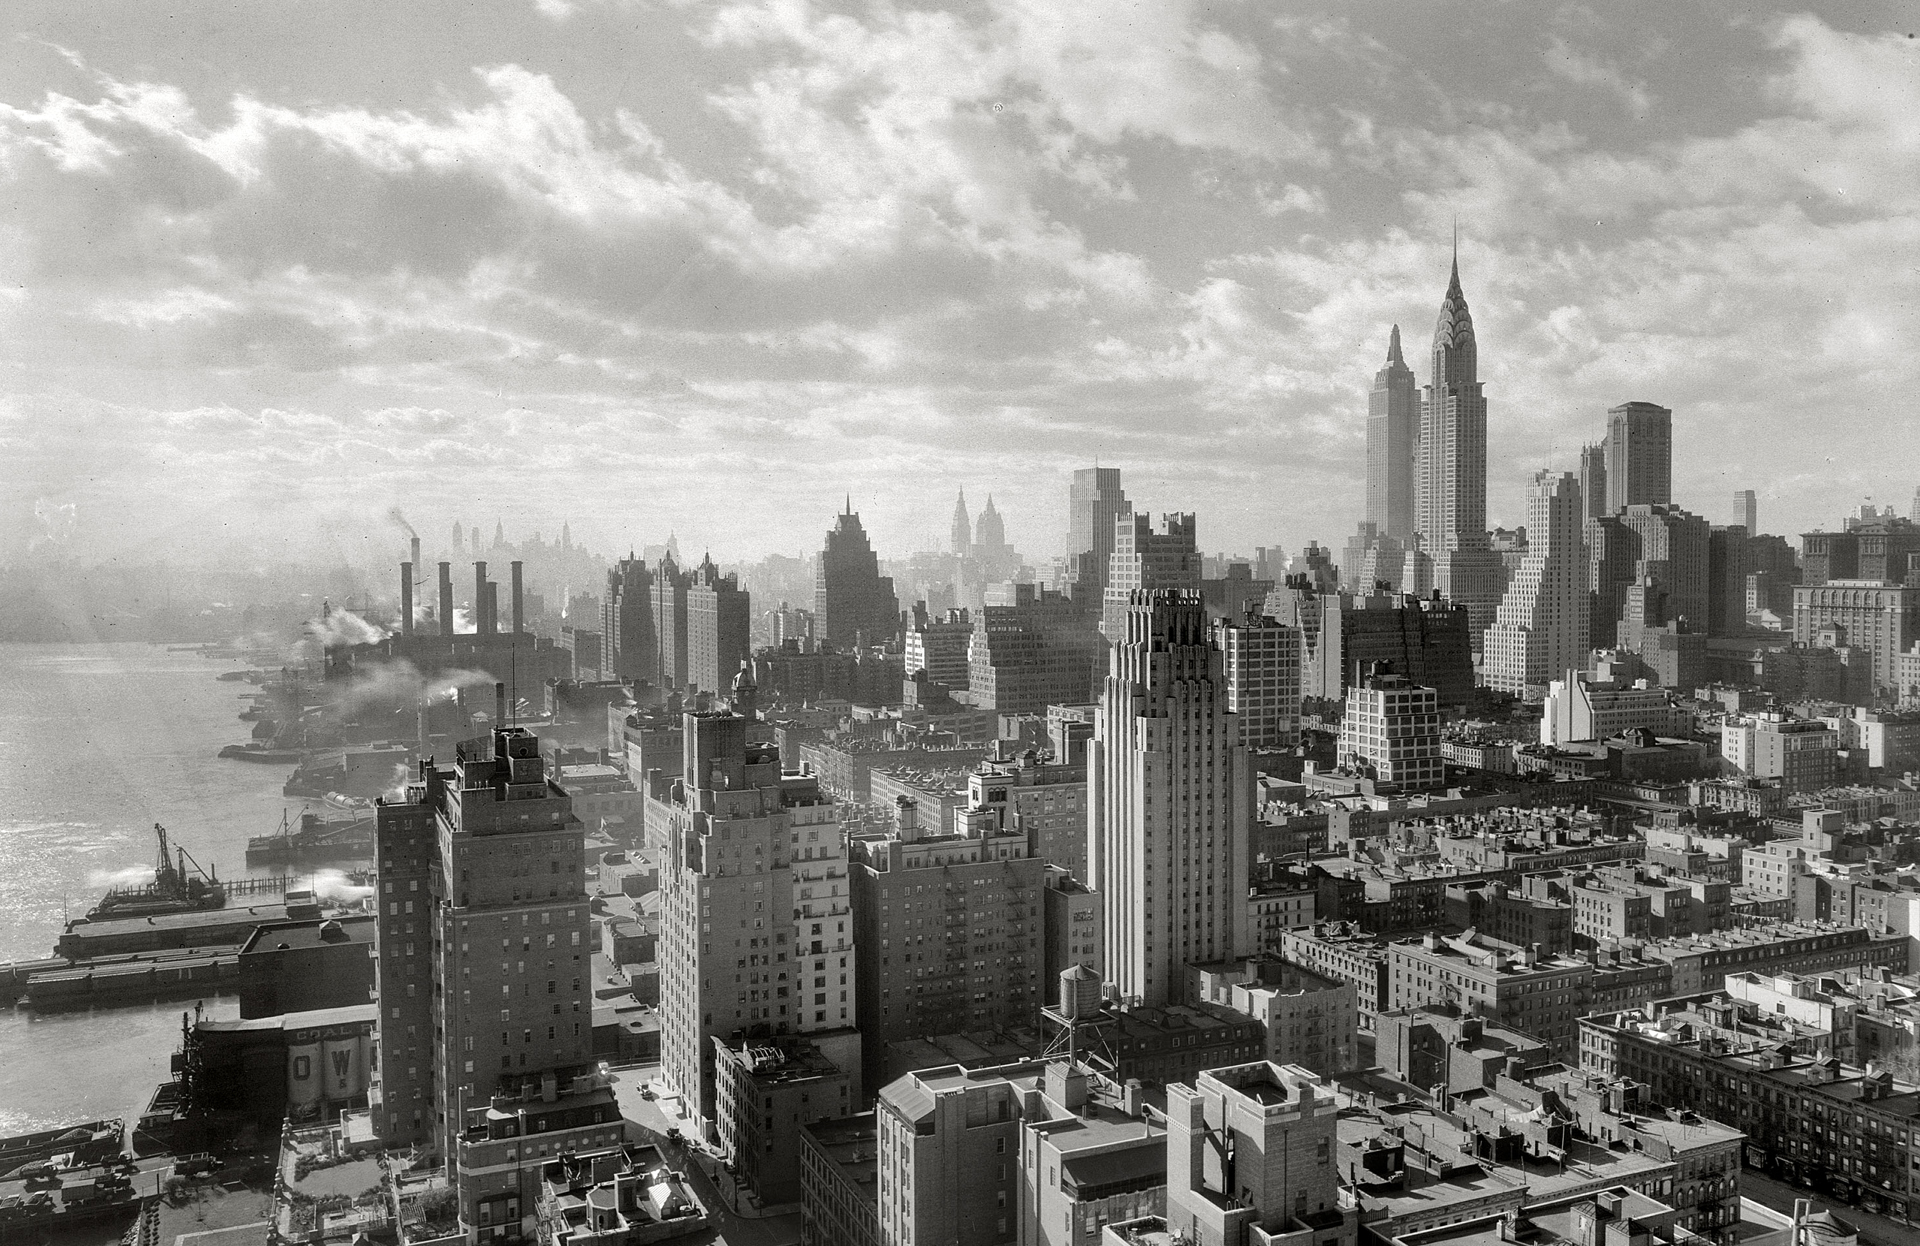 Download mobile wallpaper Cities, Usa, City, Skyscraper, Building, Vintage, Cityscape, New York, Man Made, Black & White for free.